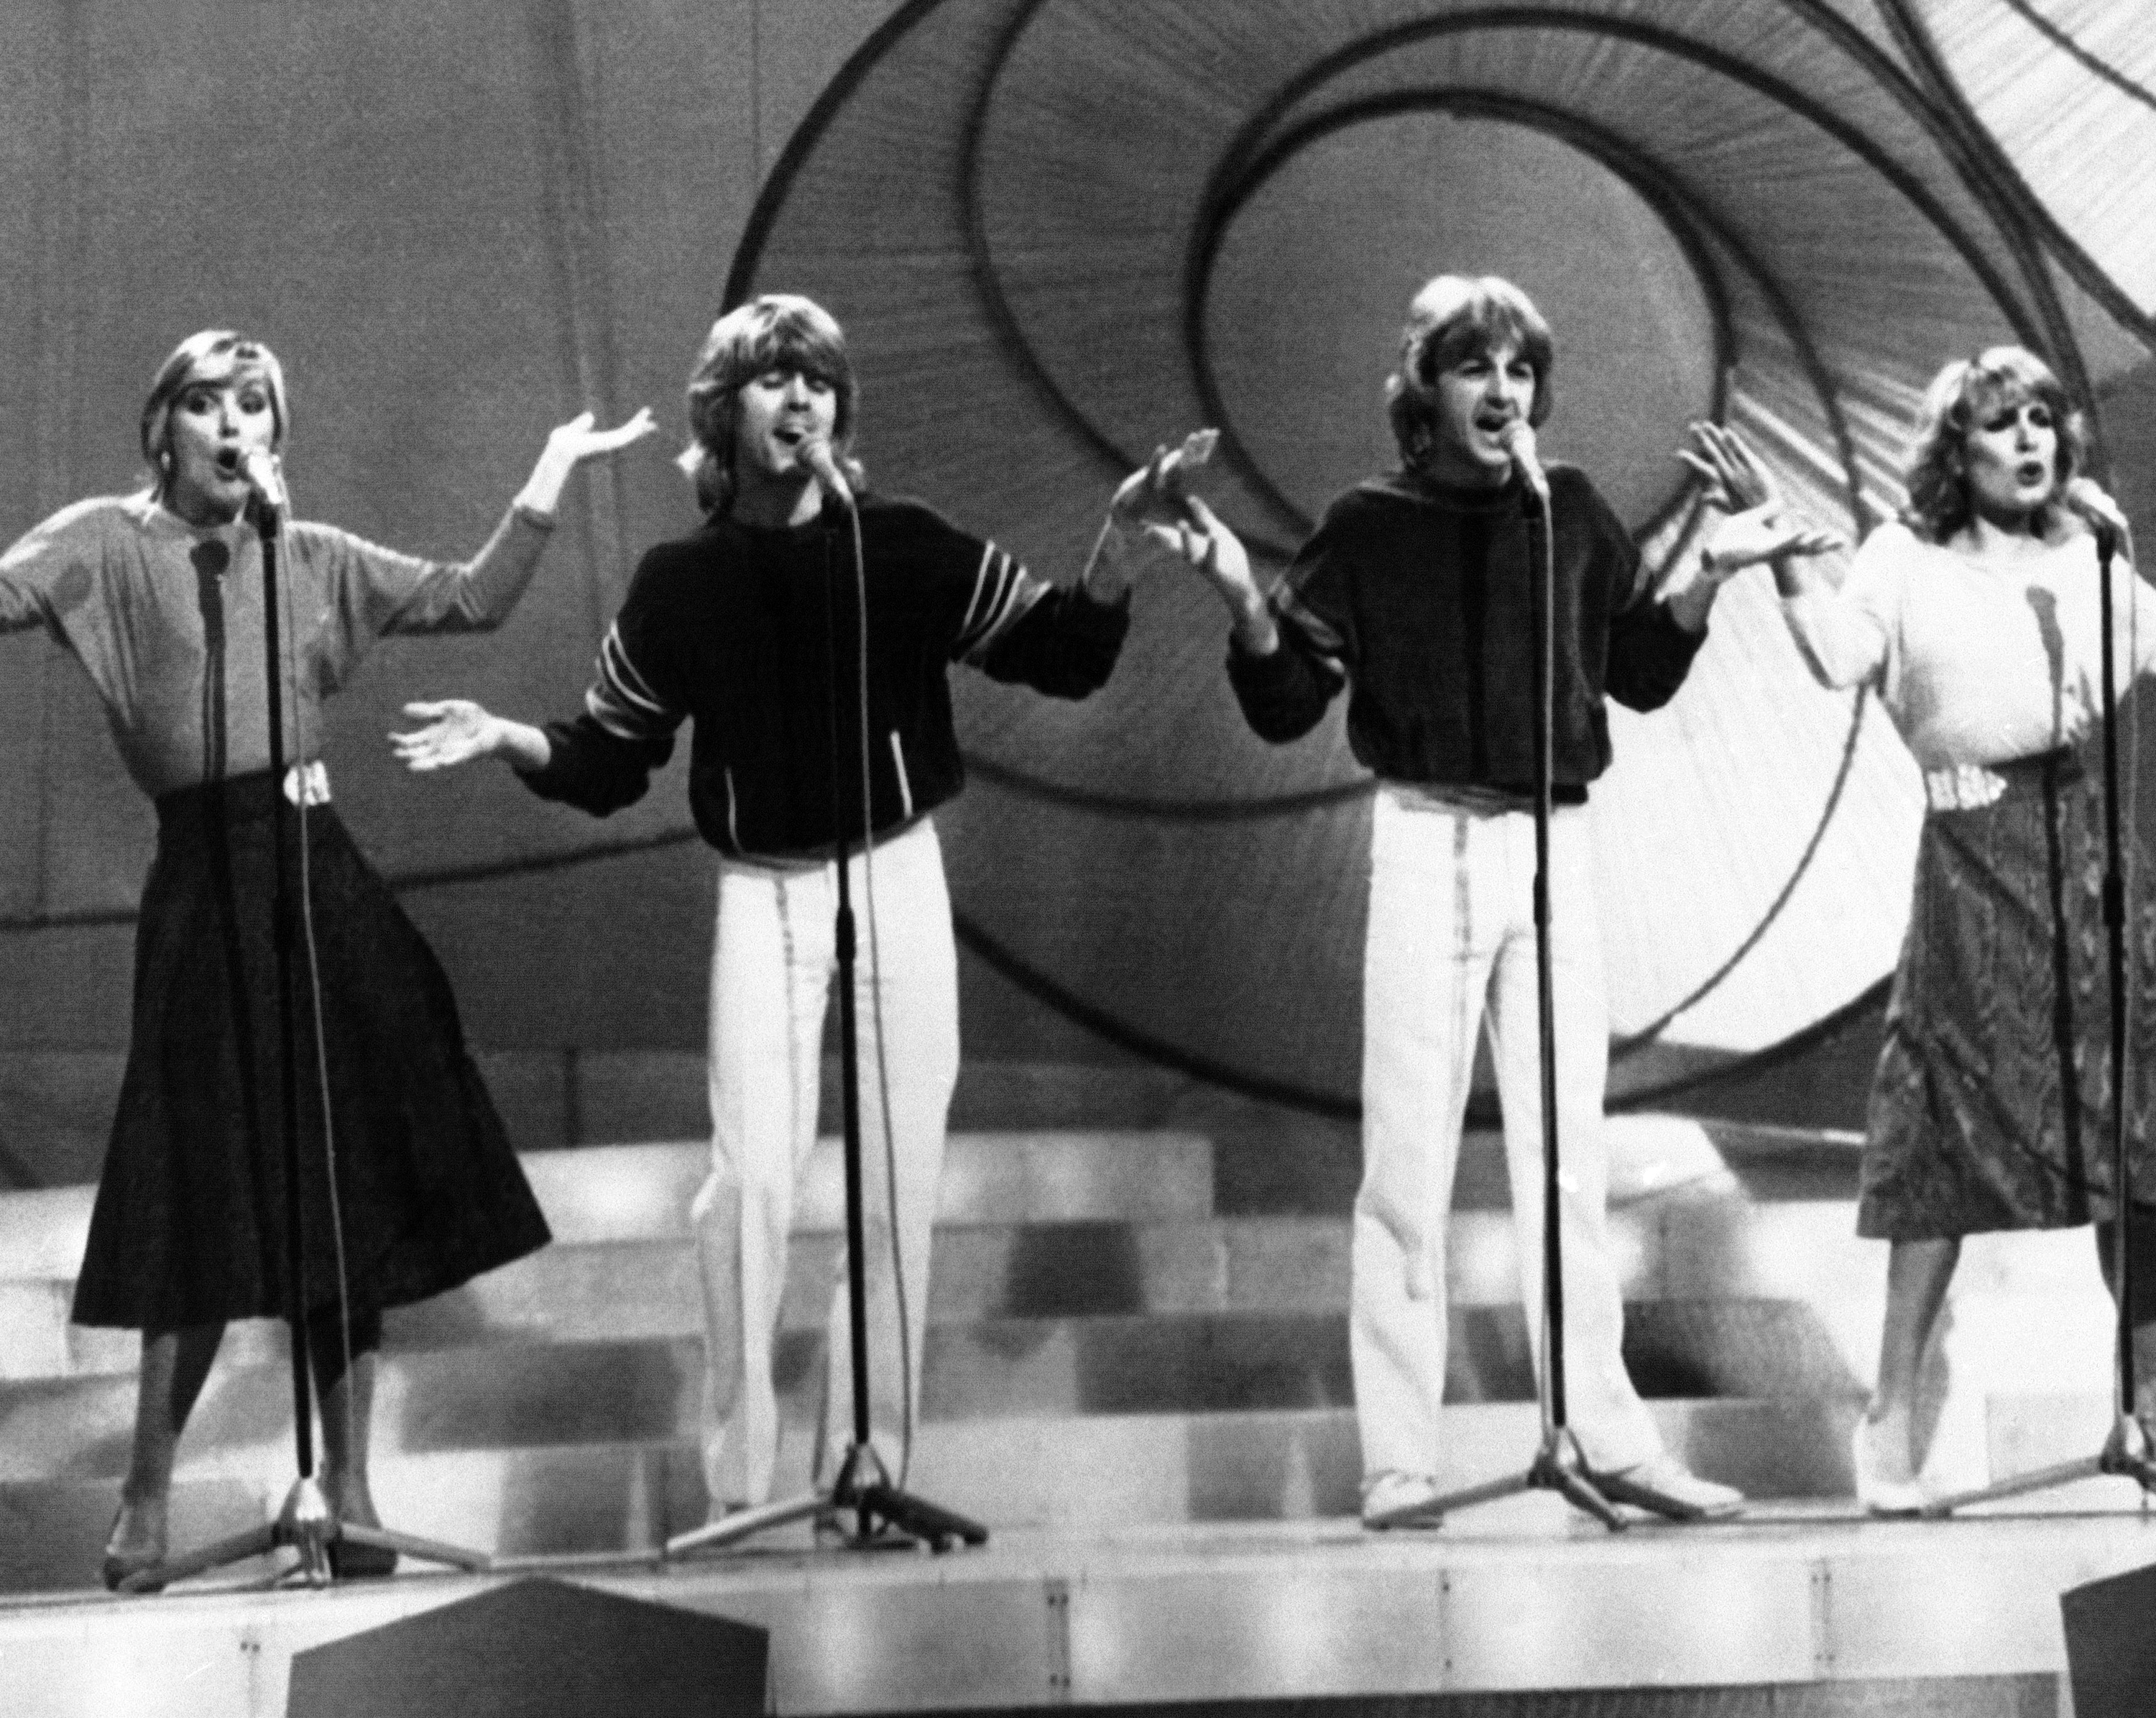 Buck's Fizz on stage during rehearsals for the Eurovision Sing contest 1981 in Dublin, Ireland